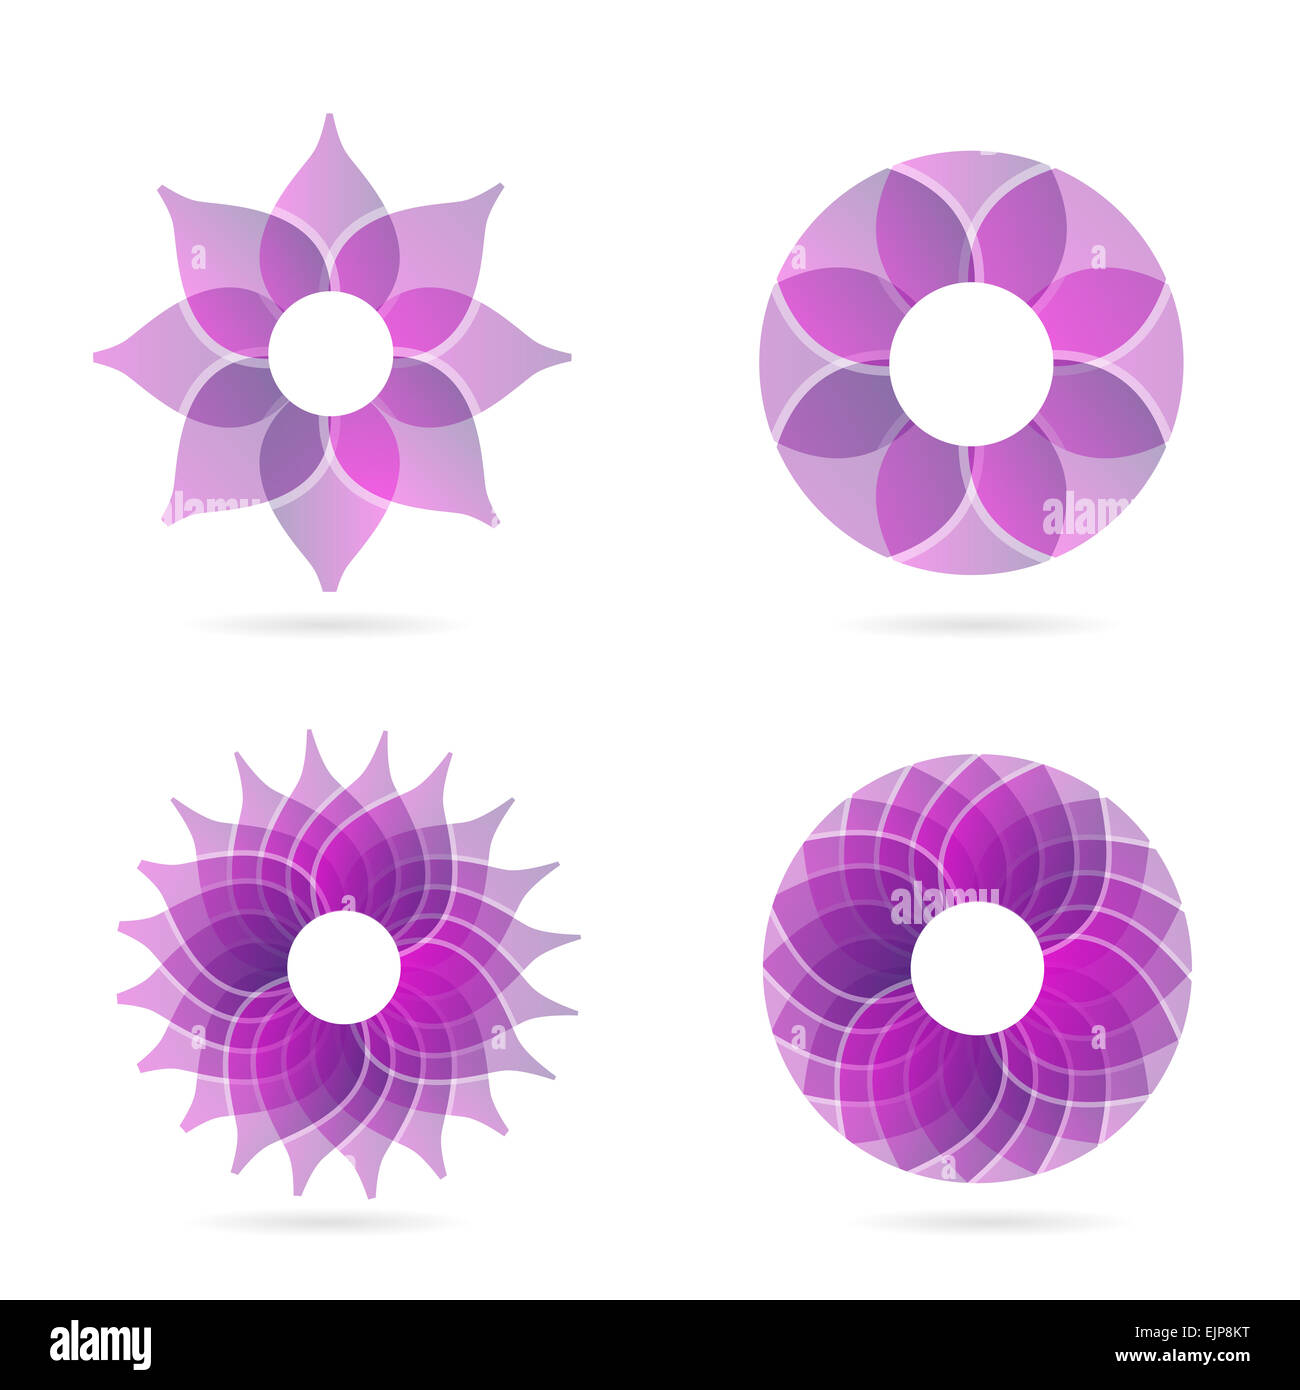 Logo vector design of a pink abstract flower logo set for spa, wellness and beauty Stock Photo